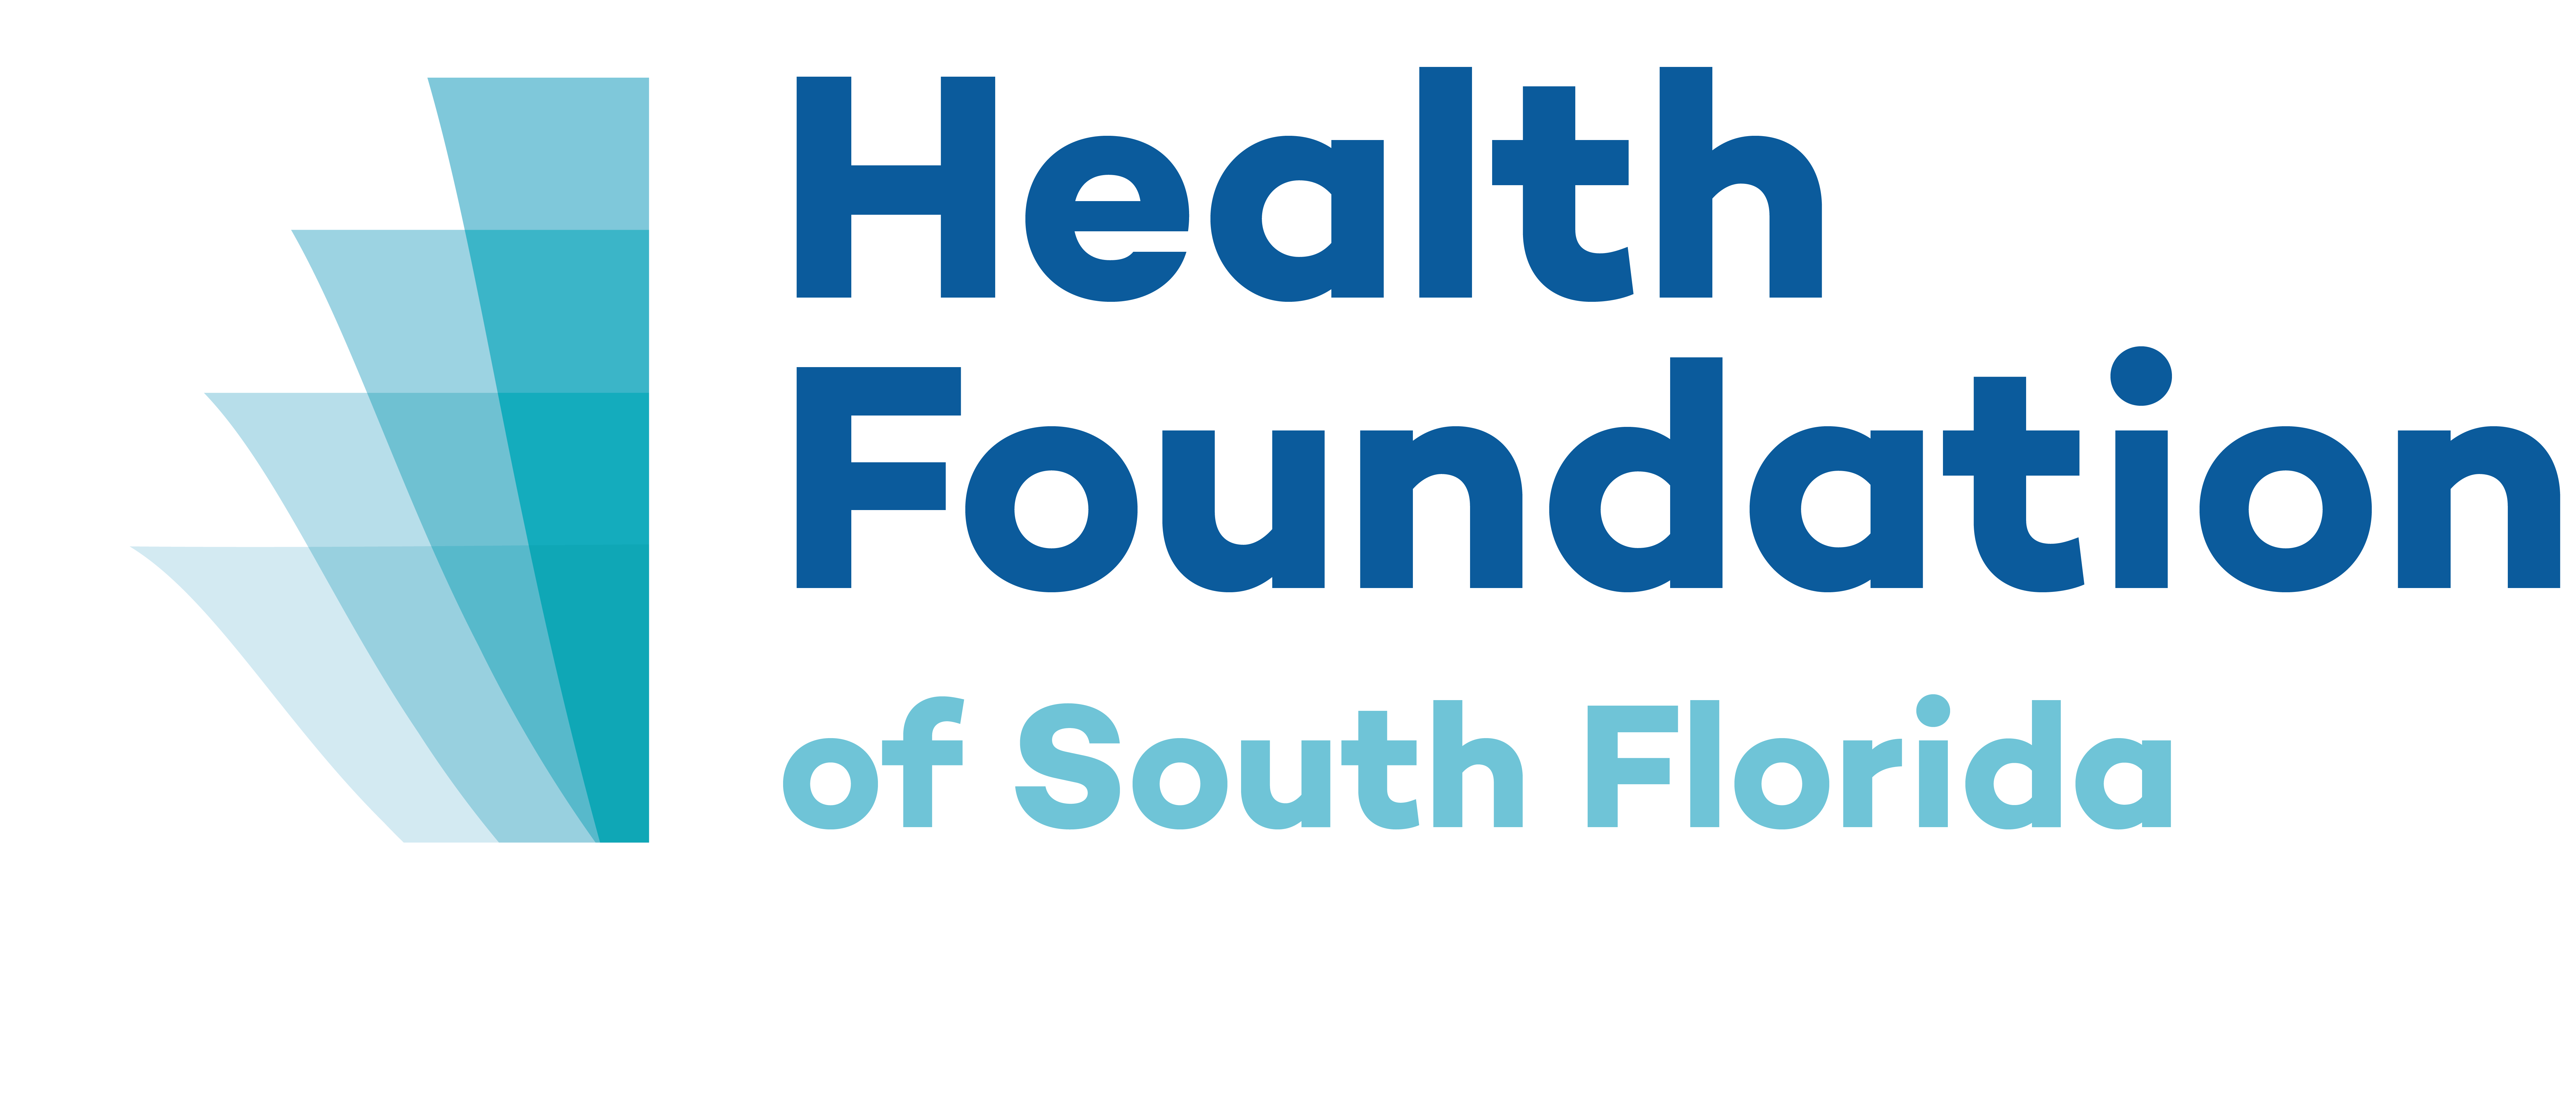 Health Foundation of South Florida invests $1 million to address region’s nursing and healthcare workforce shortage